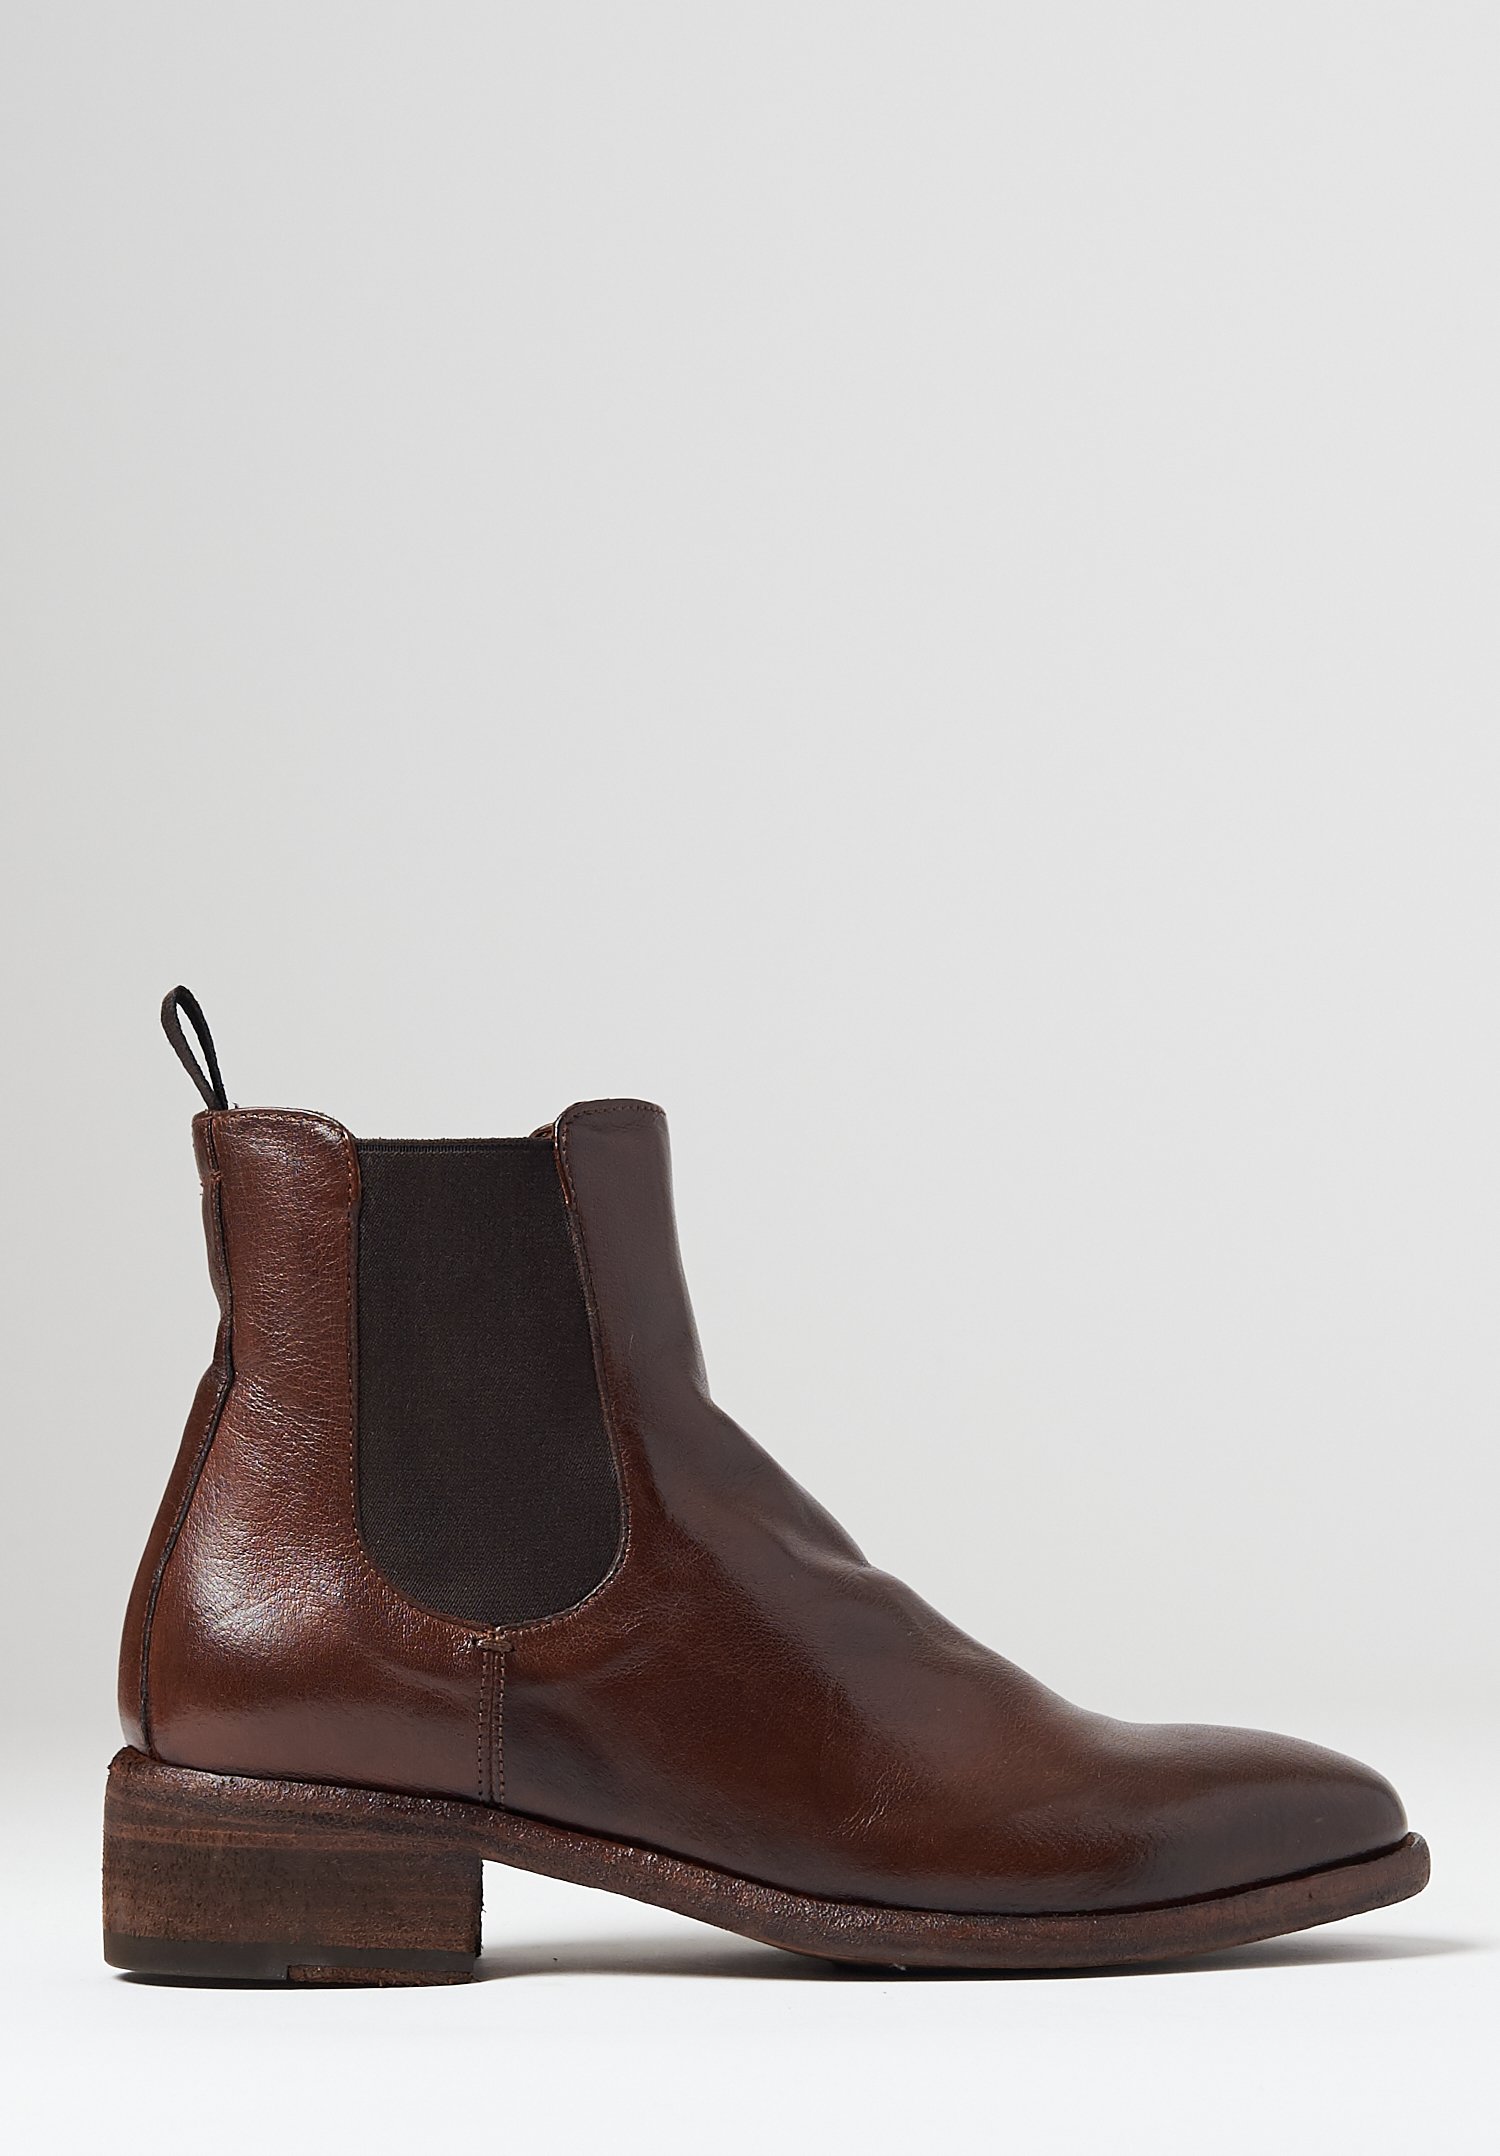 Officine Creative Seline 5 Ignis T Boot in Sauvage | Santa Fe Dry Goods ...